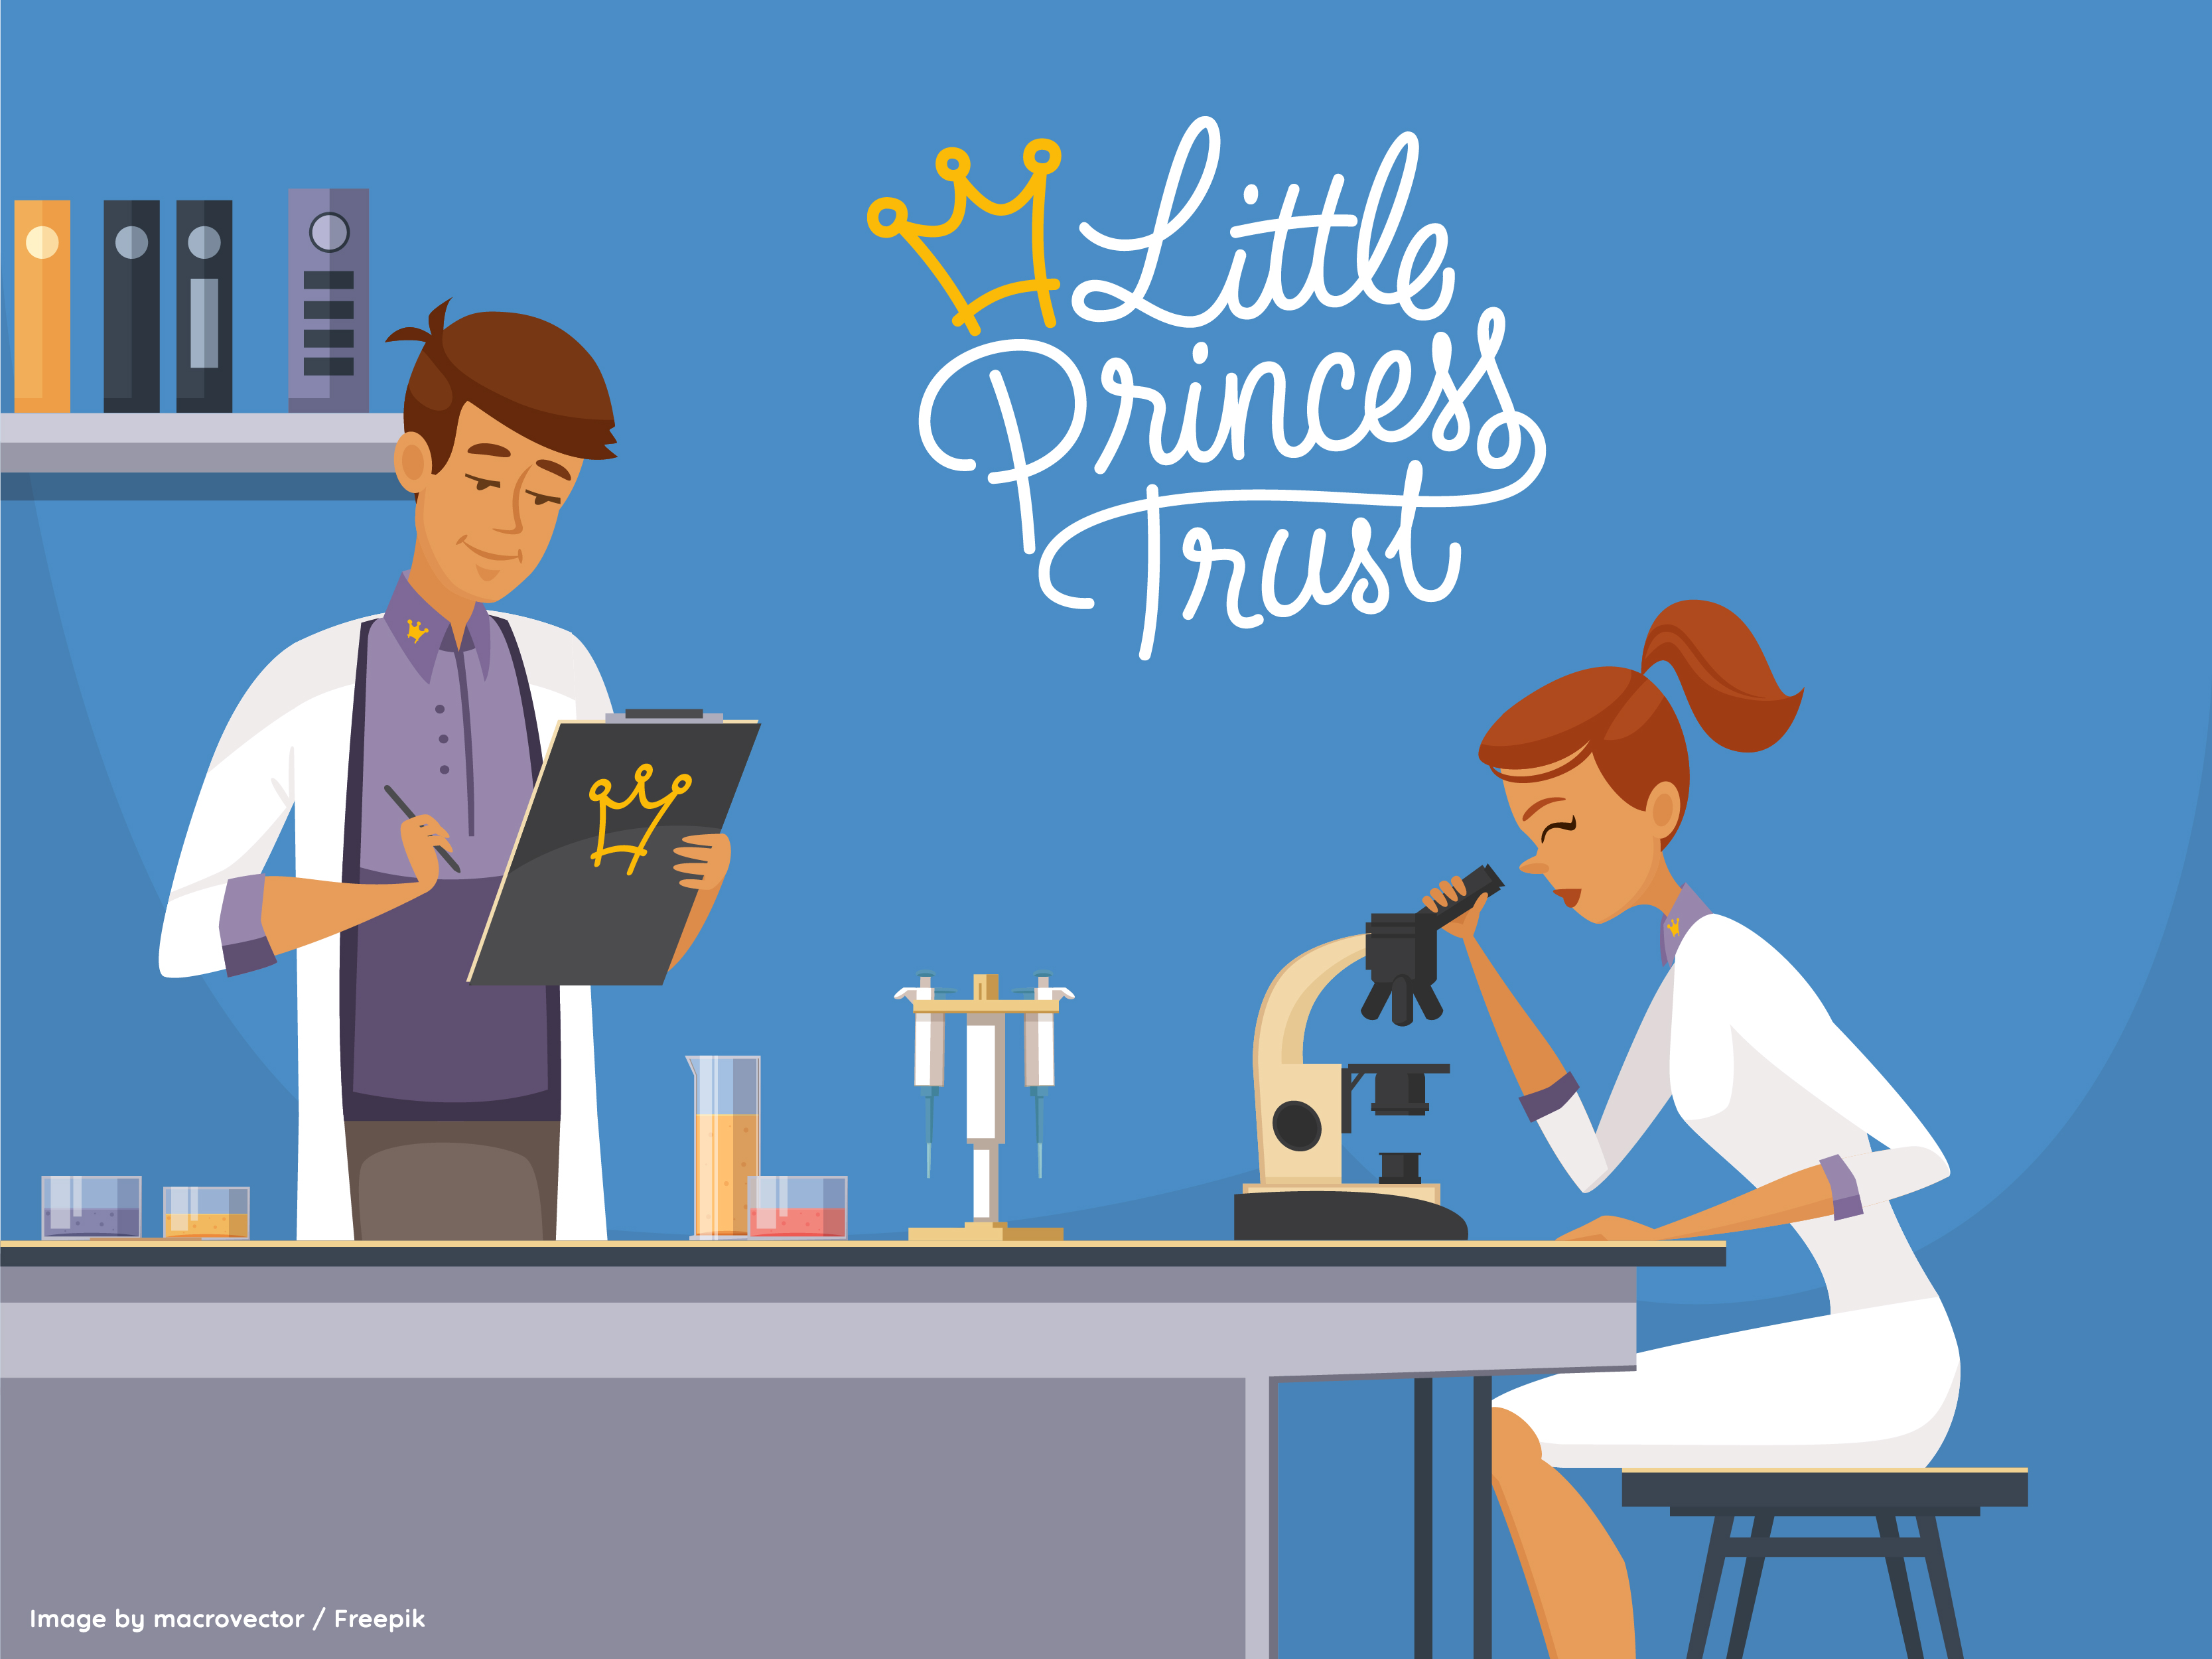 The Little Princess Trust funds research searching for kinder and more effective treatments for all childhood cancers.